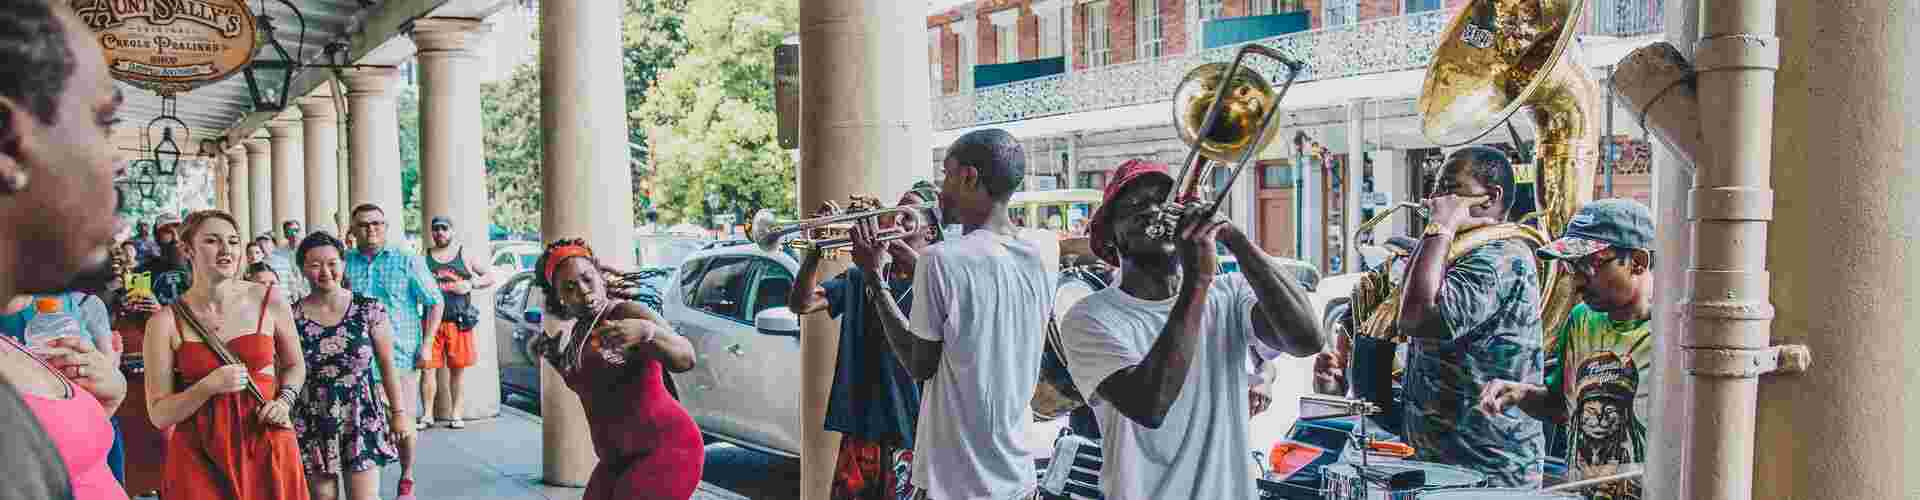 A band playing on the streets of New Orleans